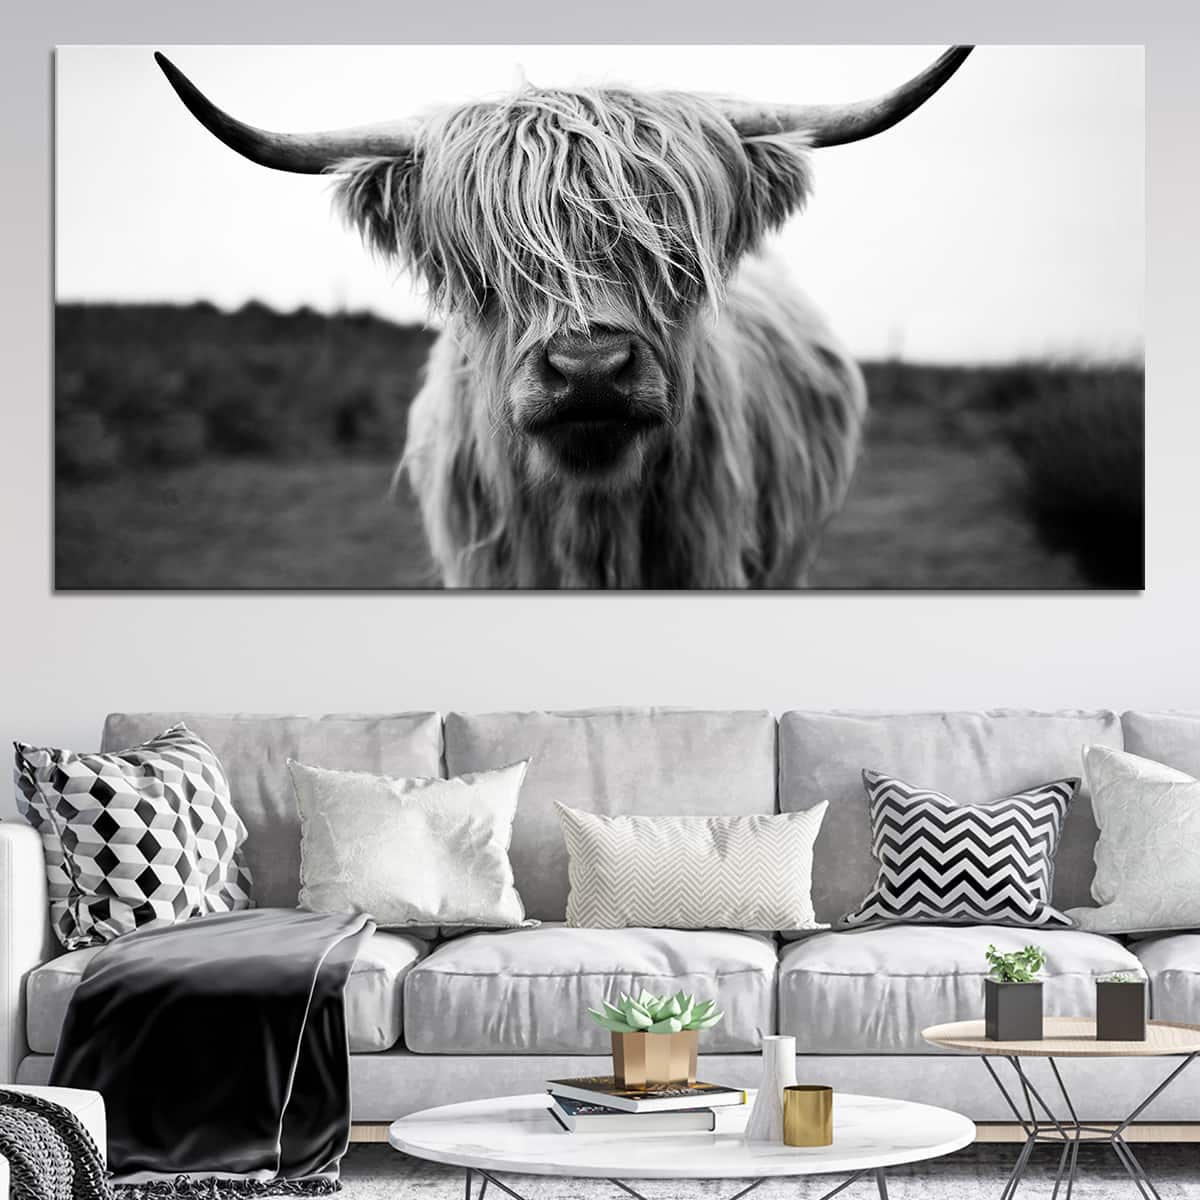 Portrait of a large black and white Scottish highland cow canvas wall art in a single piece